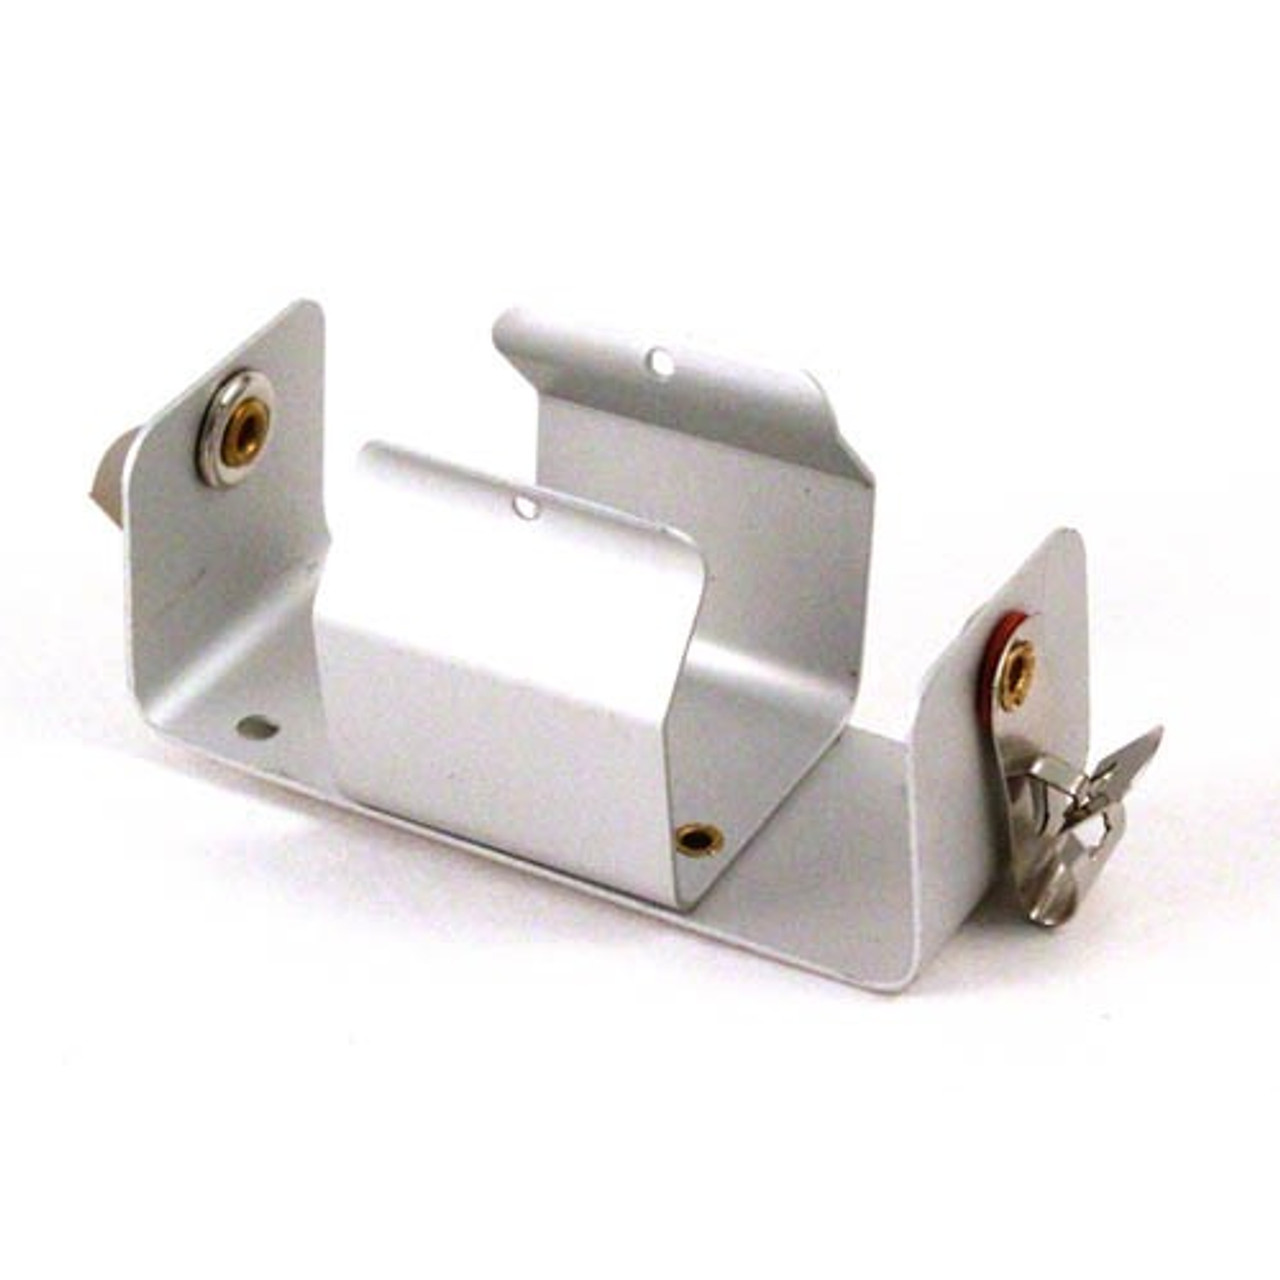 1 D cell metal battery holder with Fahnstock clips